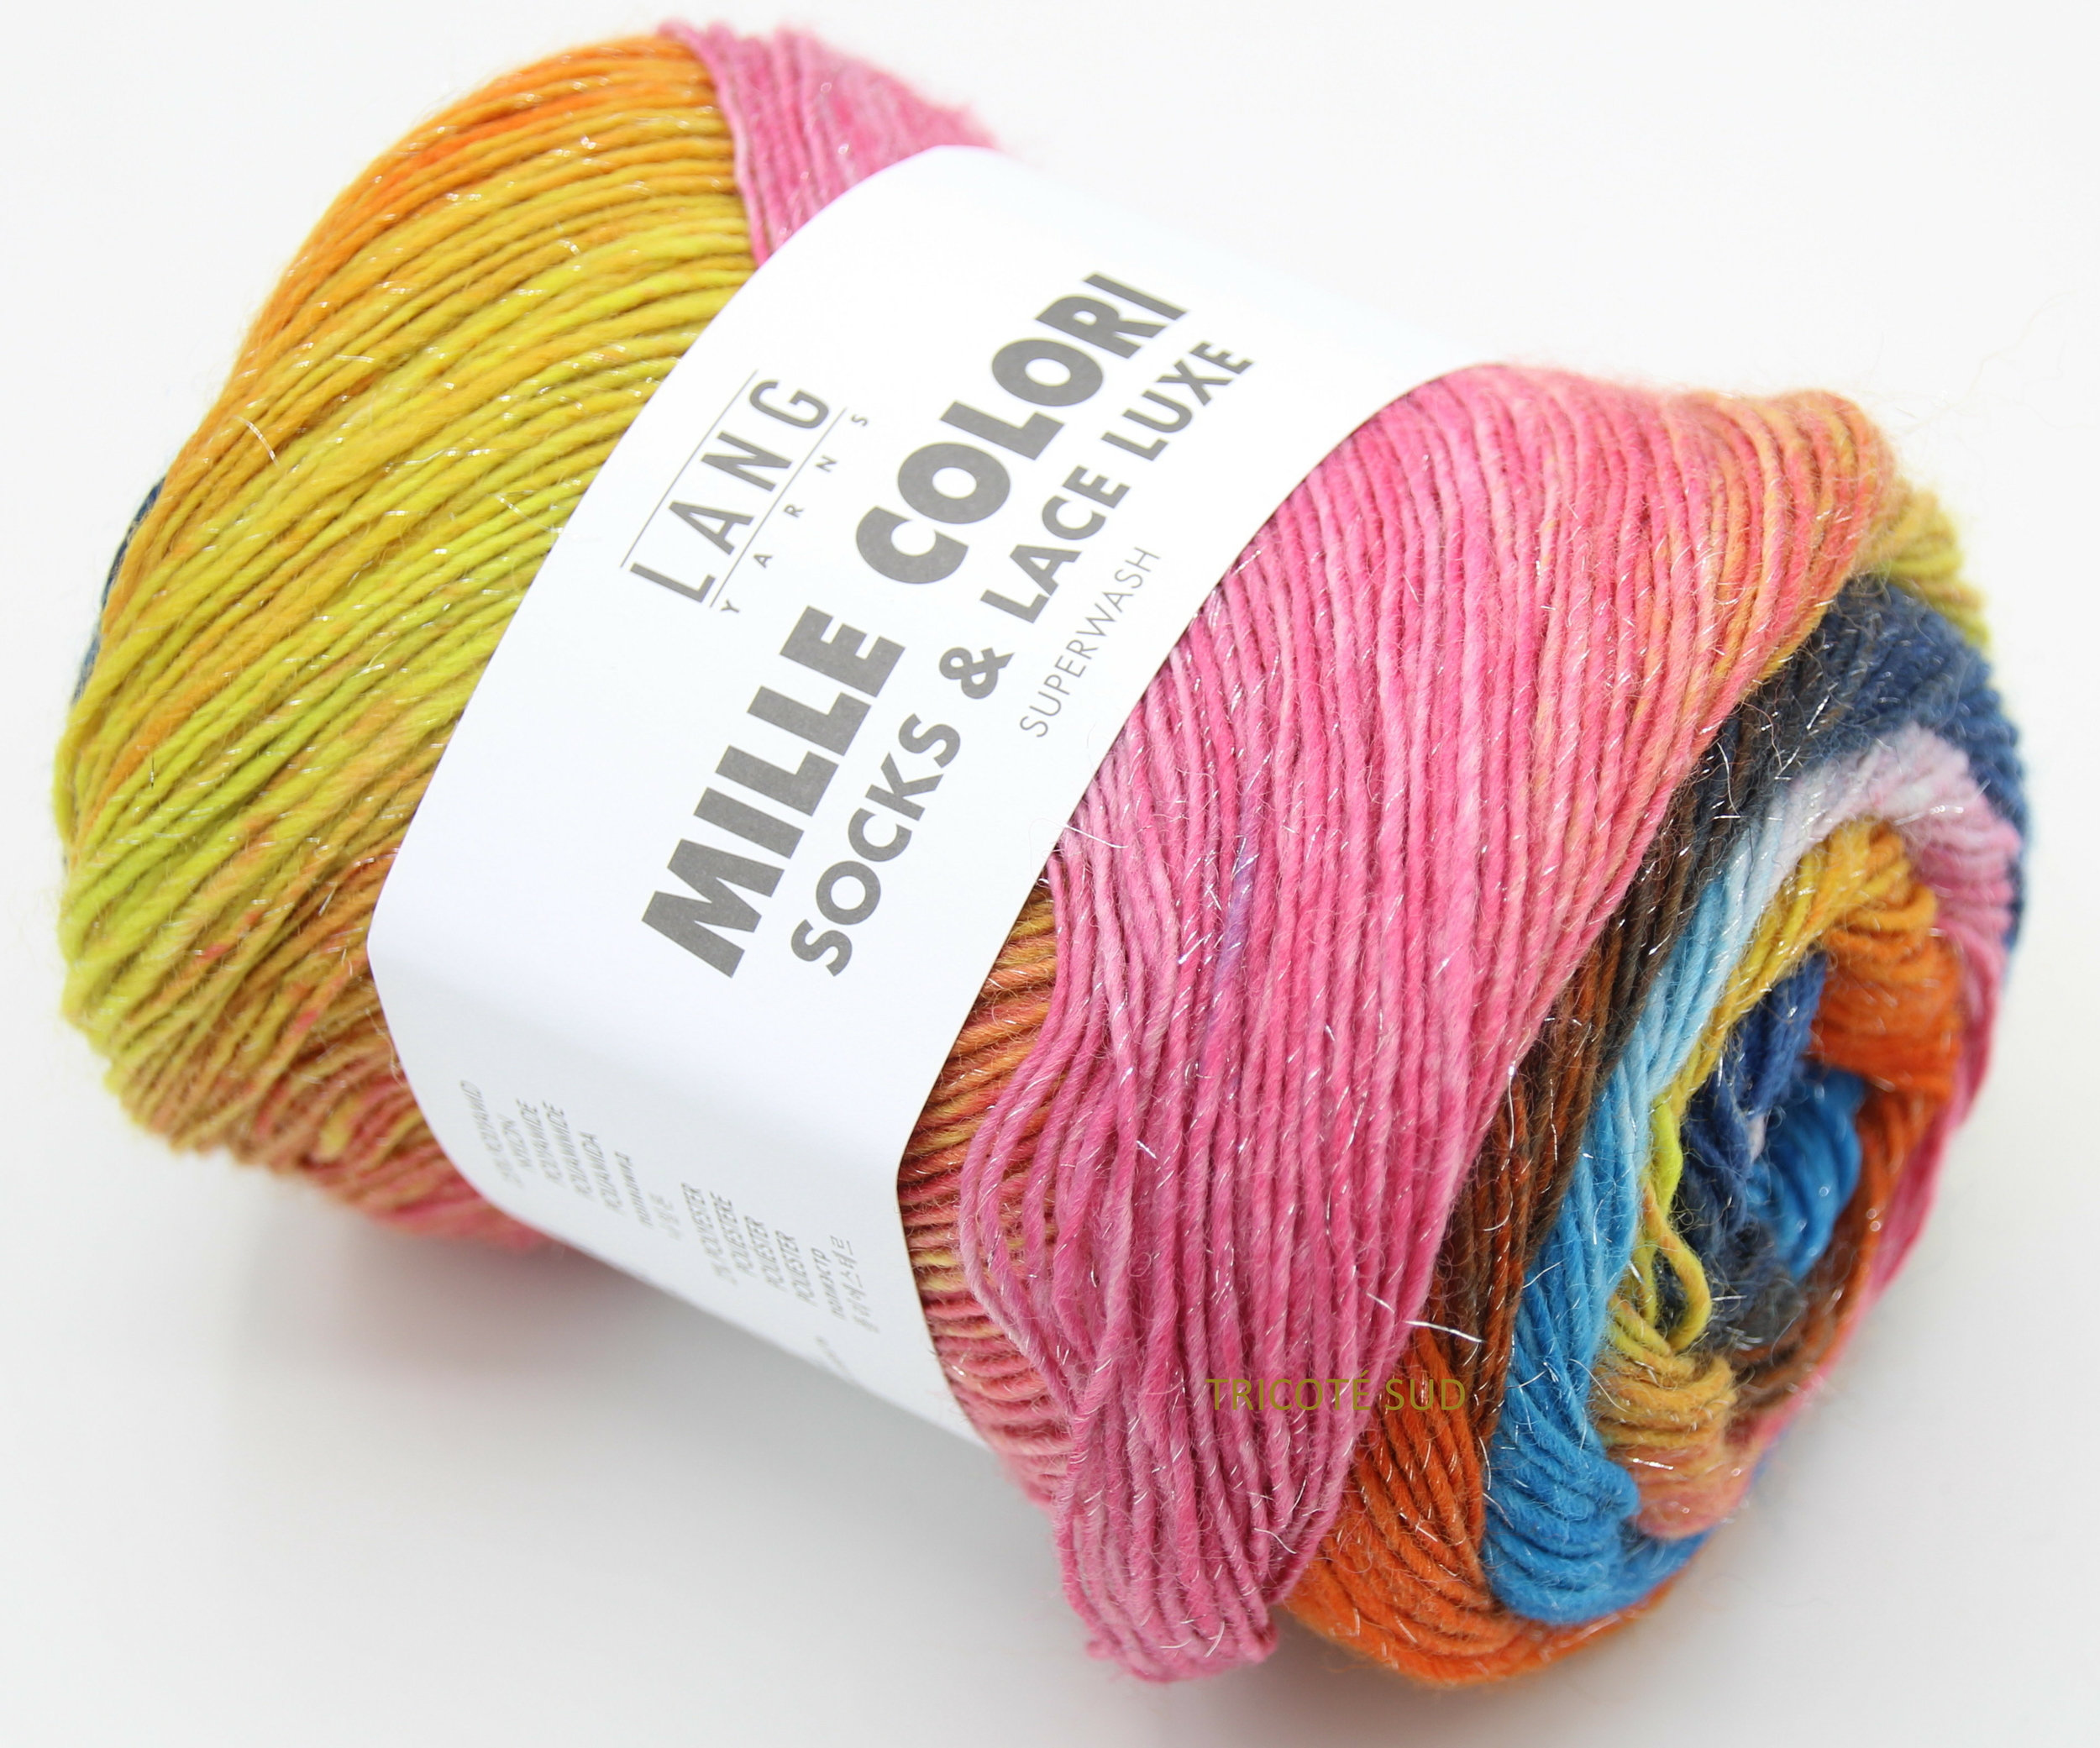 MILLE COLORI SOCKS AND LACE LUXE COLORIS 212 (2)